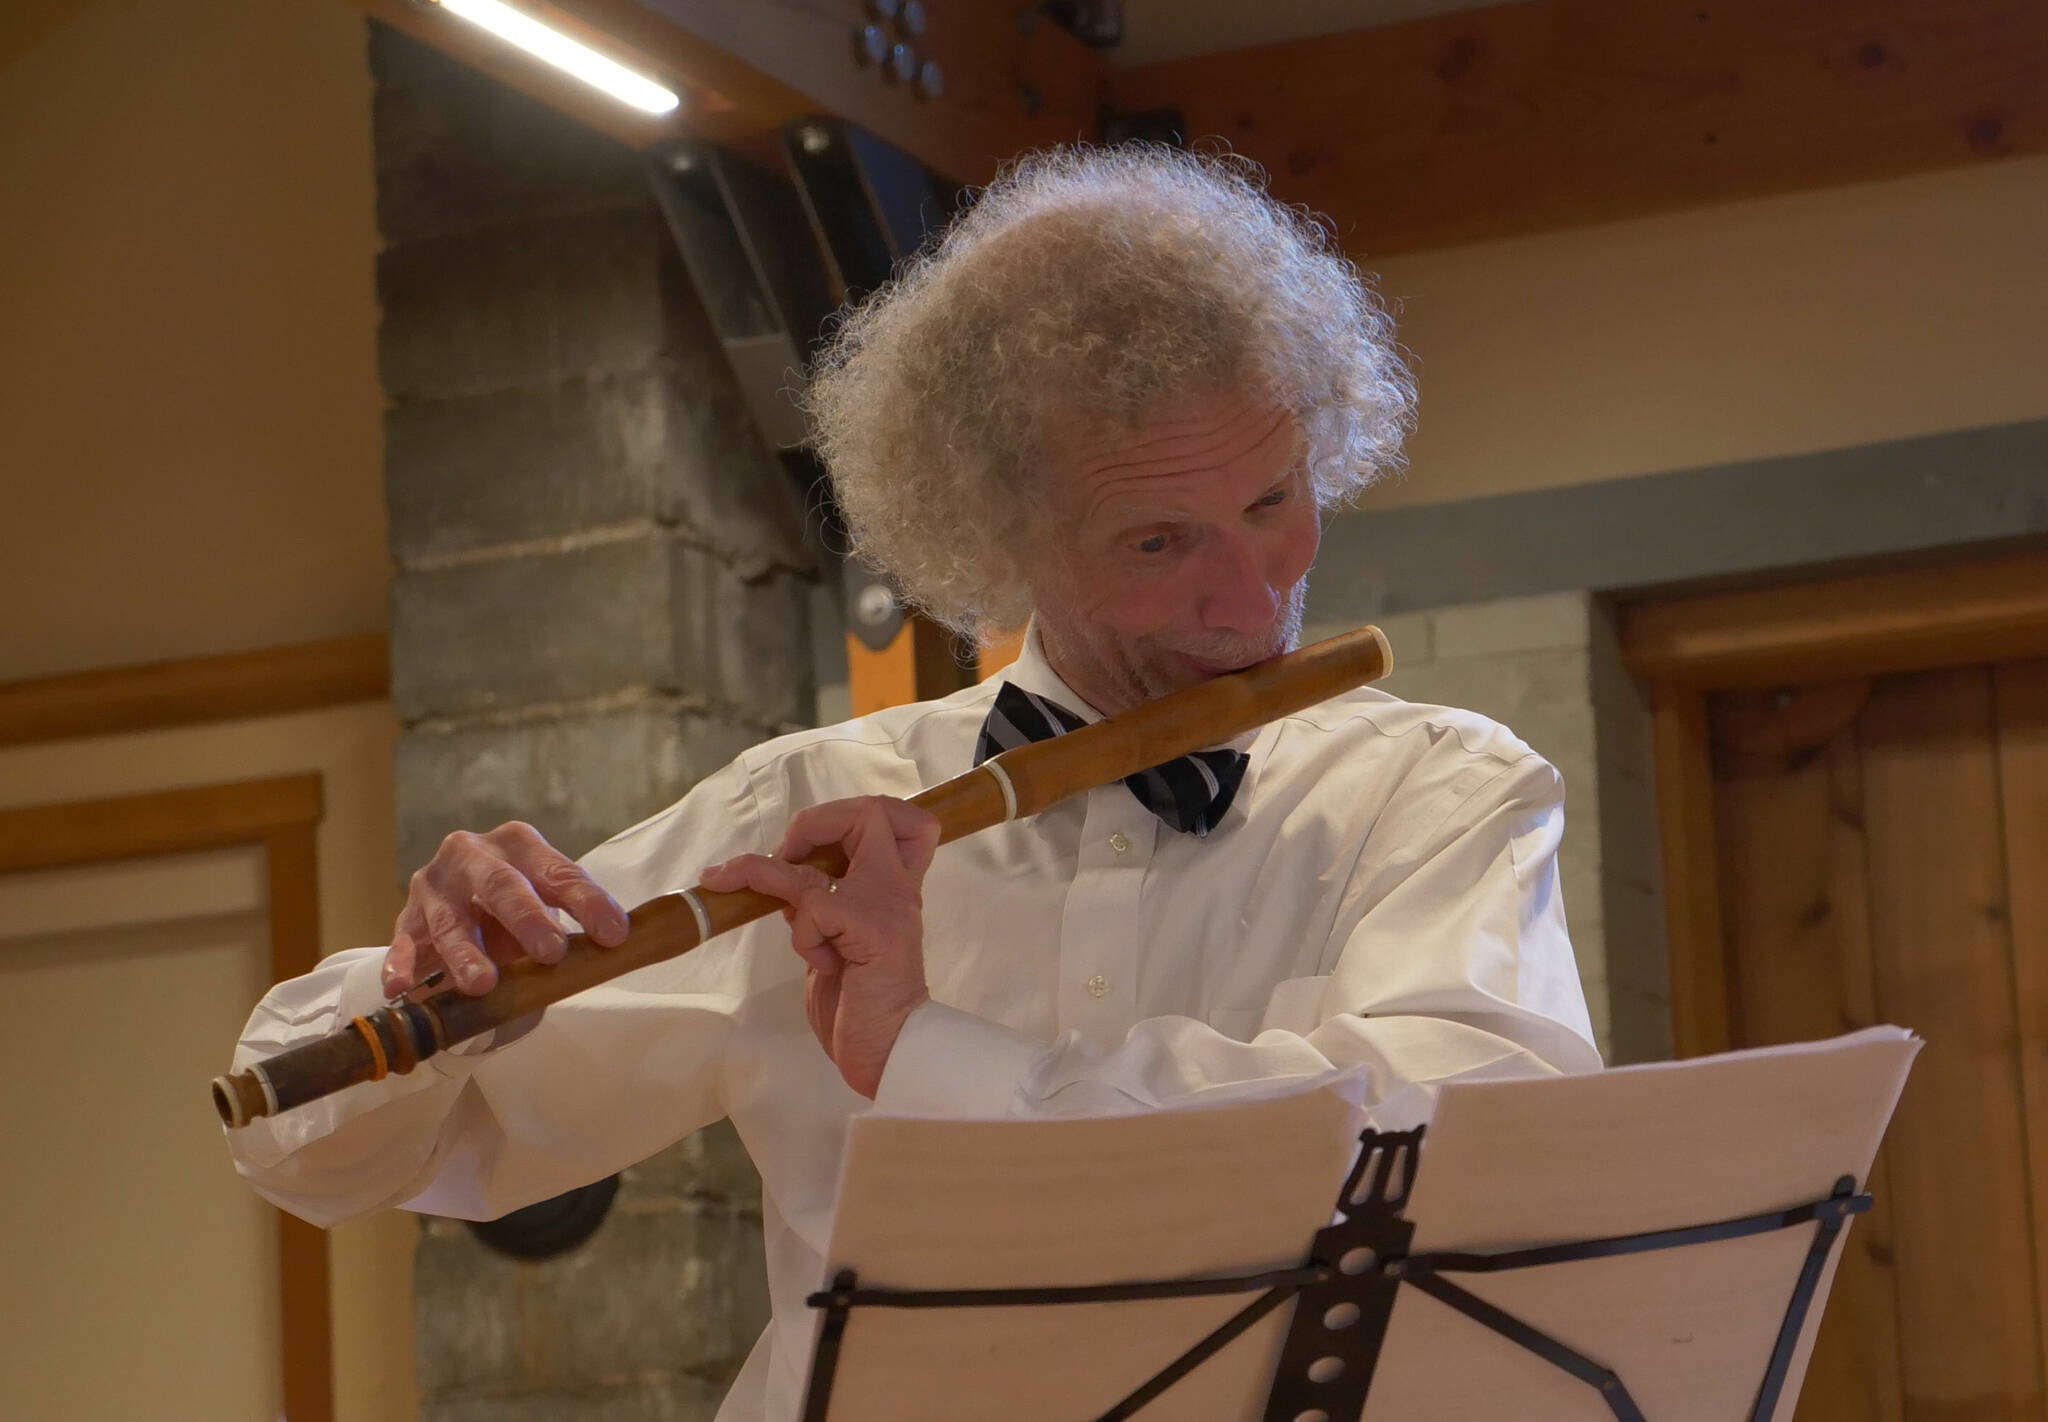 Jeffrey Cohan will play the baroque flute — the part of Frederick the Great — in the upcoming performance by the Salish Sea Early Music Festival. (Photo provided)